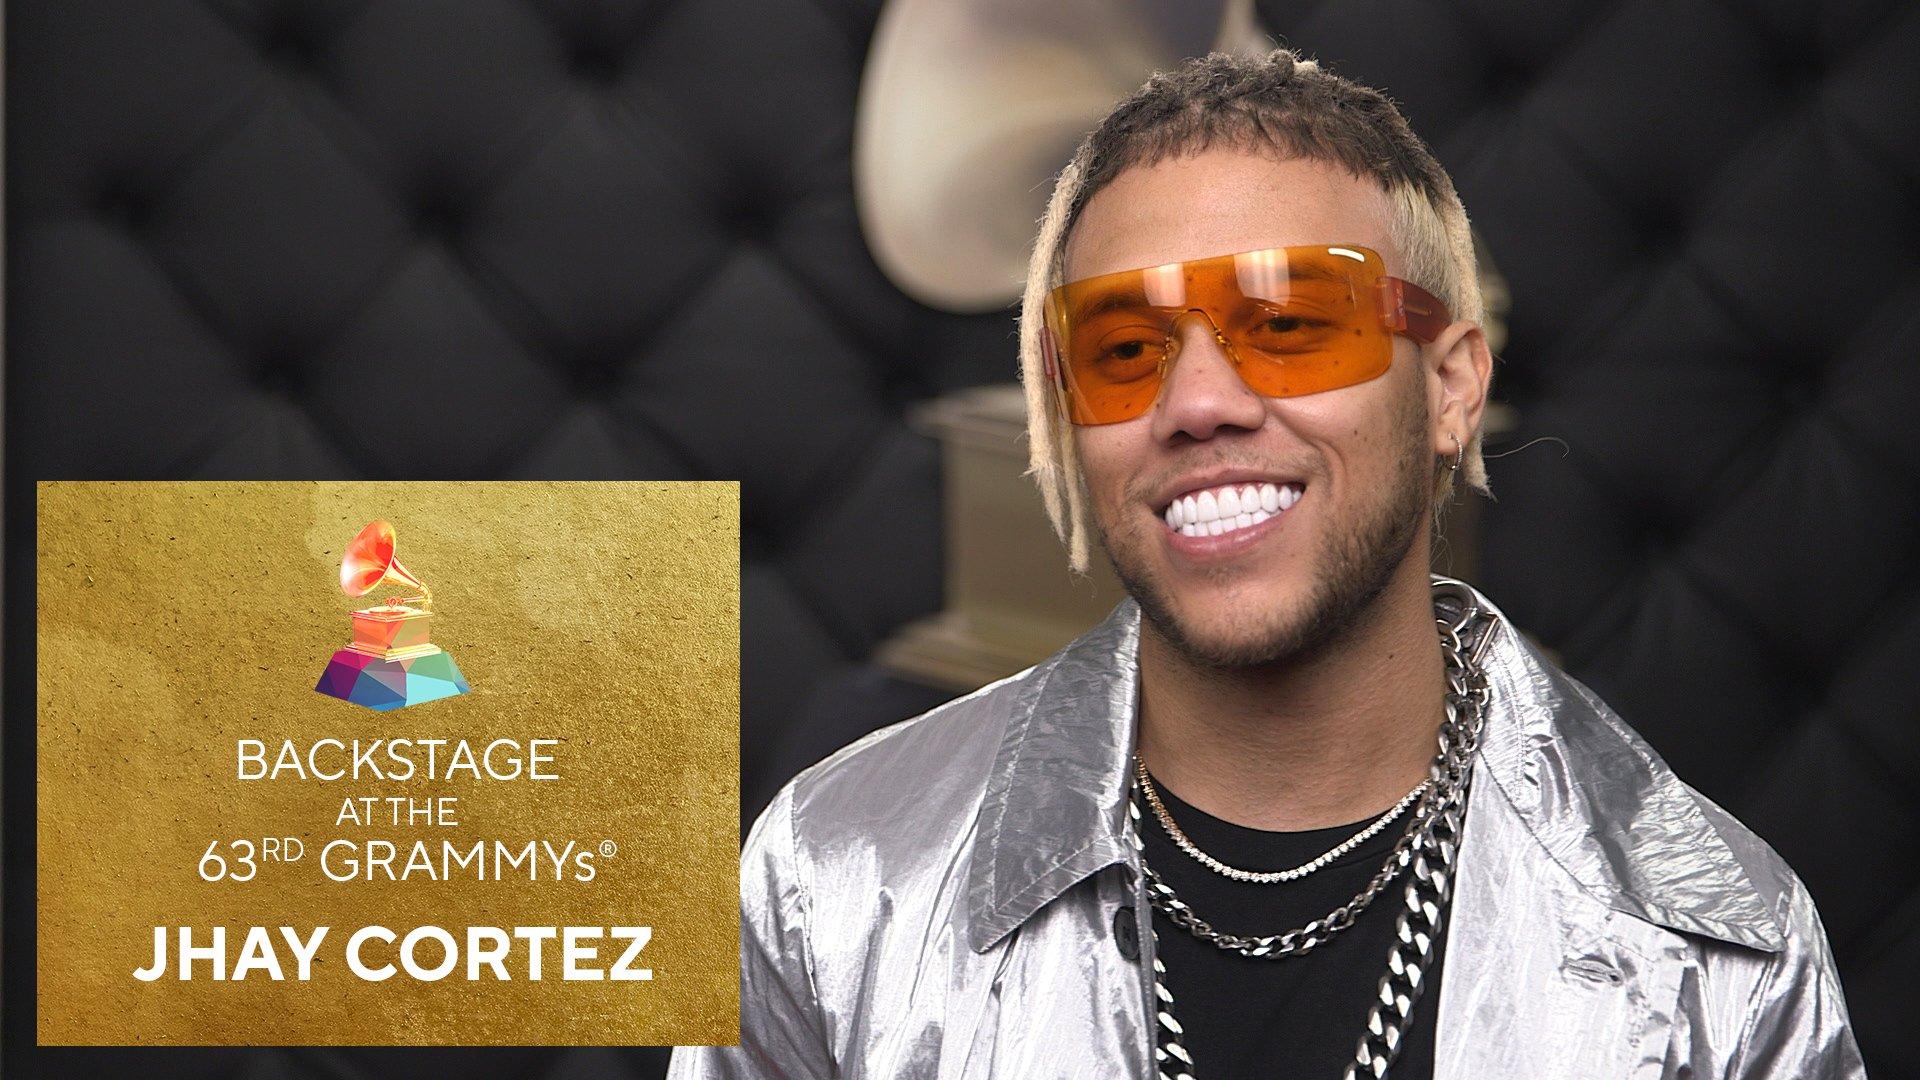 Watch: Jhay Cortez Backstage At The 63rd GRAMMYs